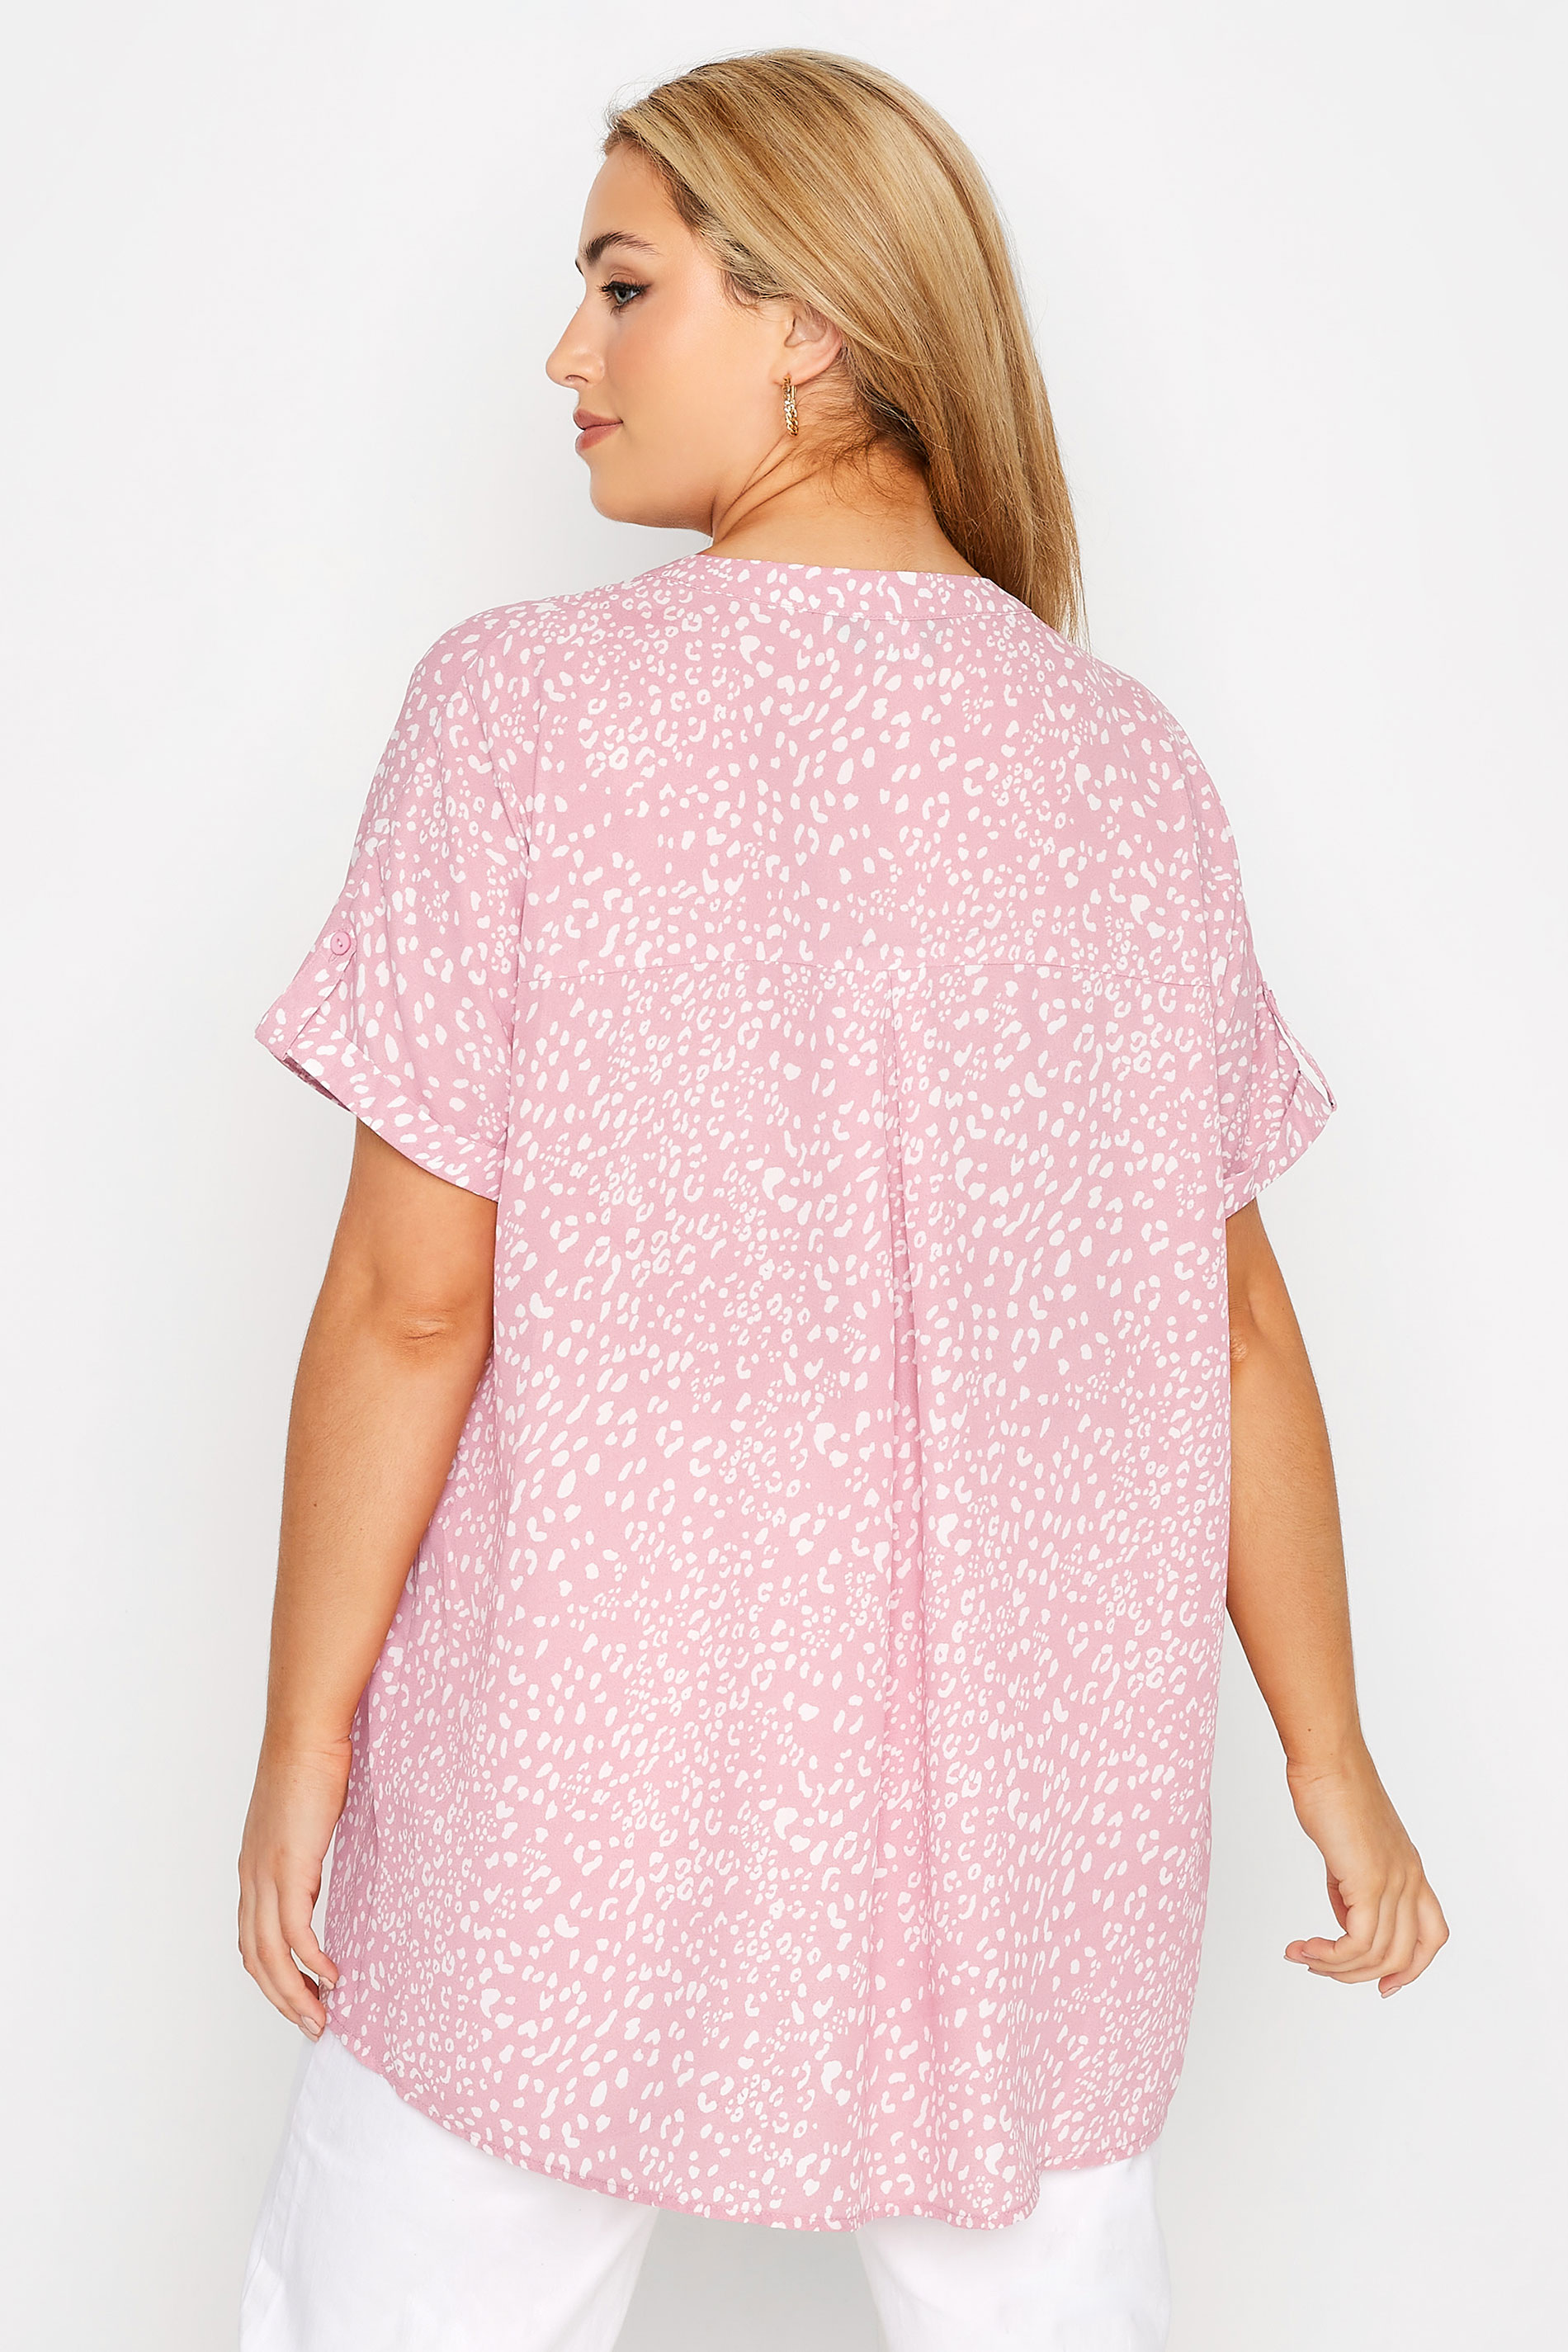 Grande taille  Tops Grande taille  Blouses & Chemisiers | Chemisier Rose Manches Courtes Imprimé Animal - RI93660